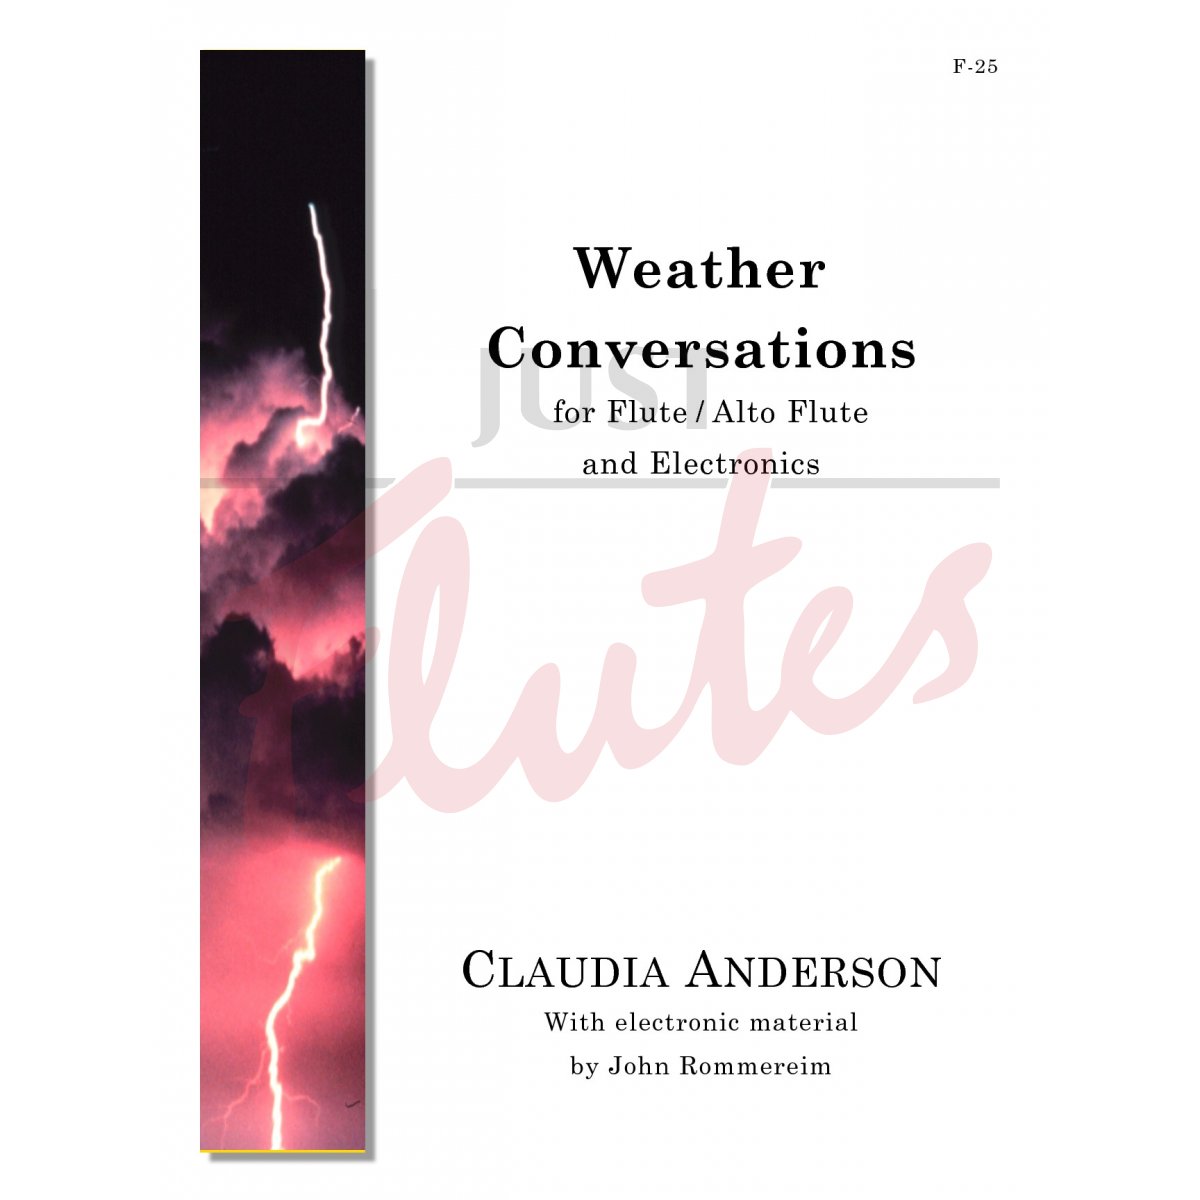 Weather Conversations for Flute, Alto Flute and Electronics